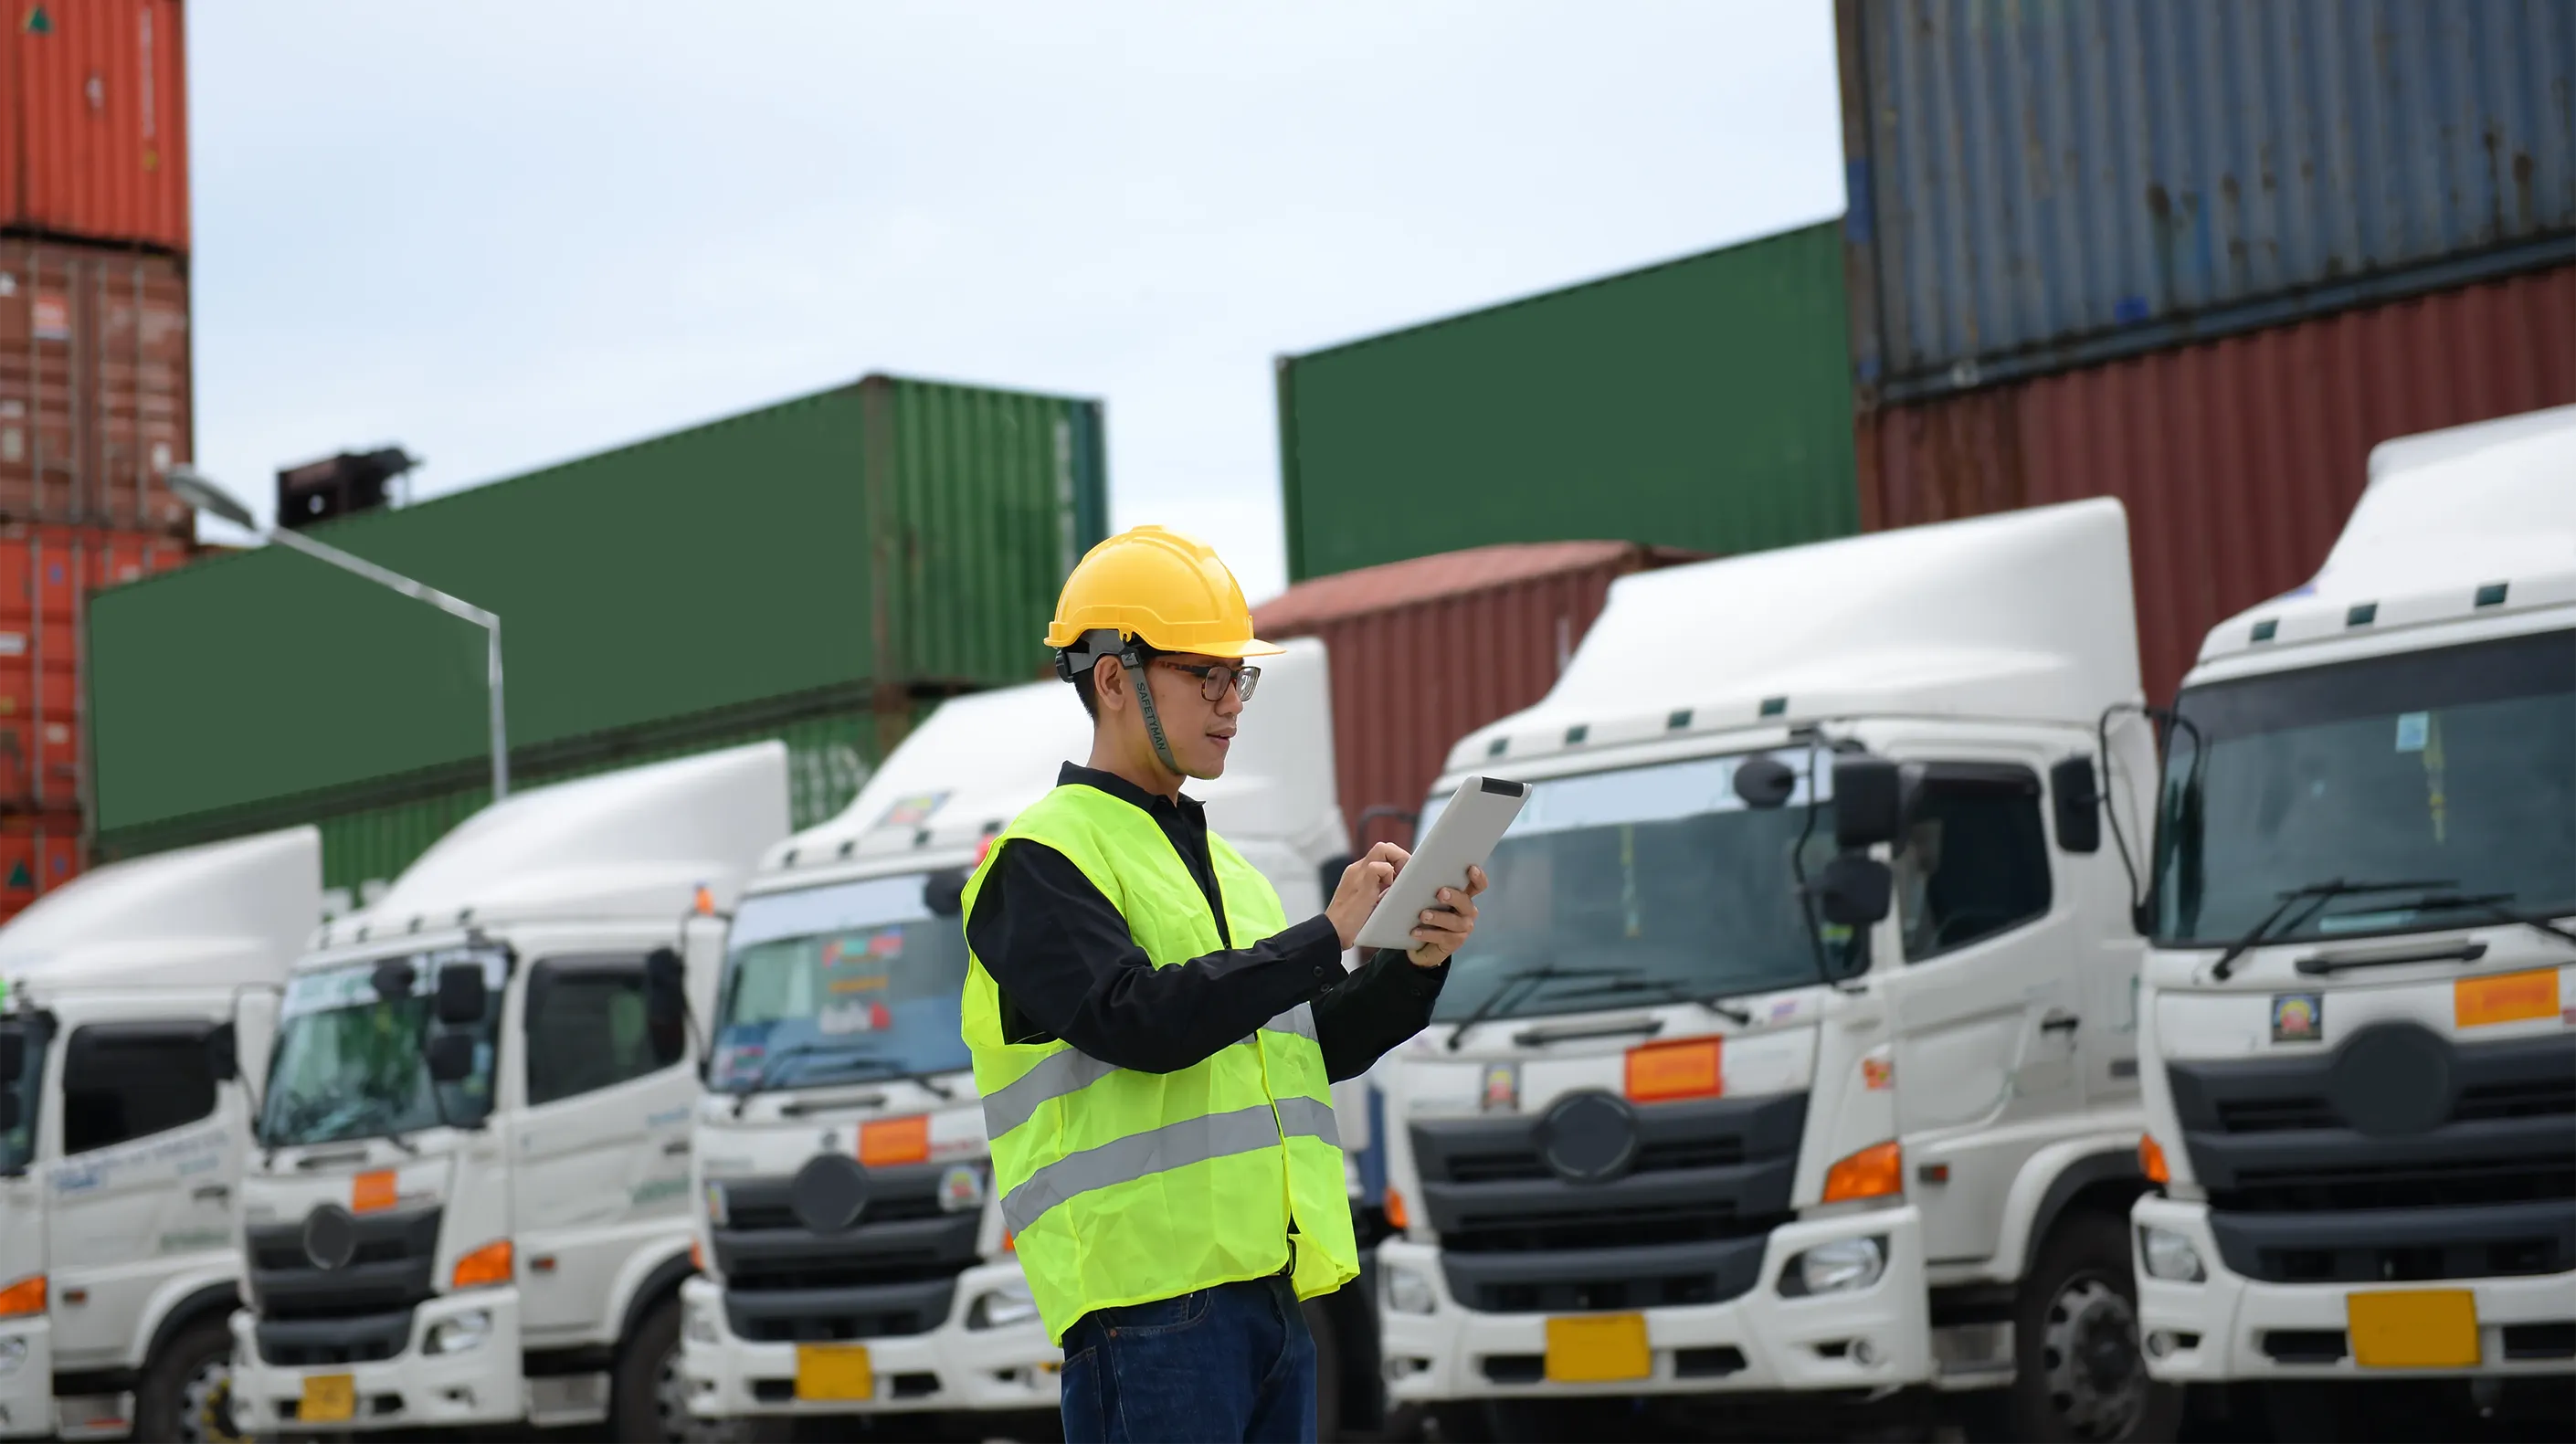 Fleet manager looking at a tablet while standing in front of a few trucks and cargo boxes.